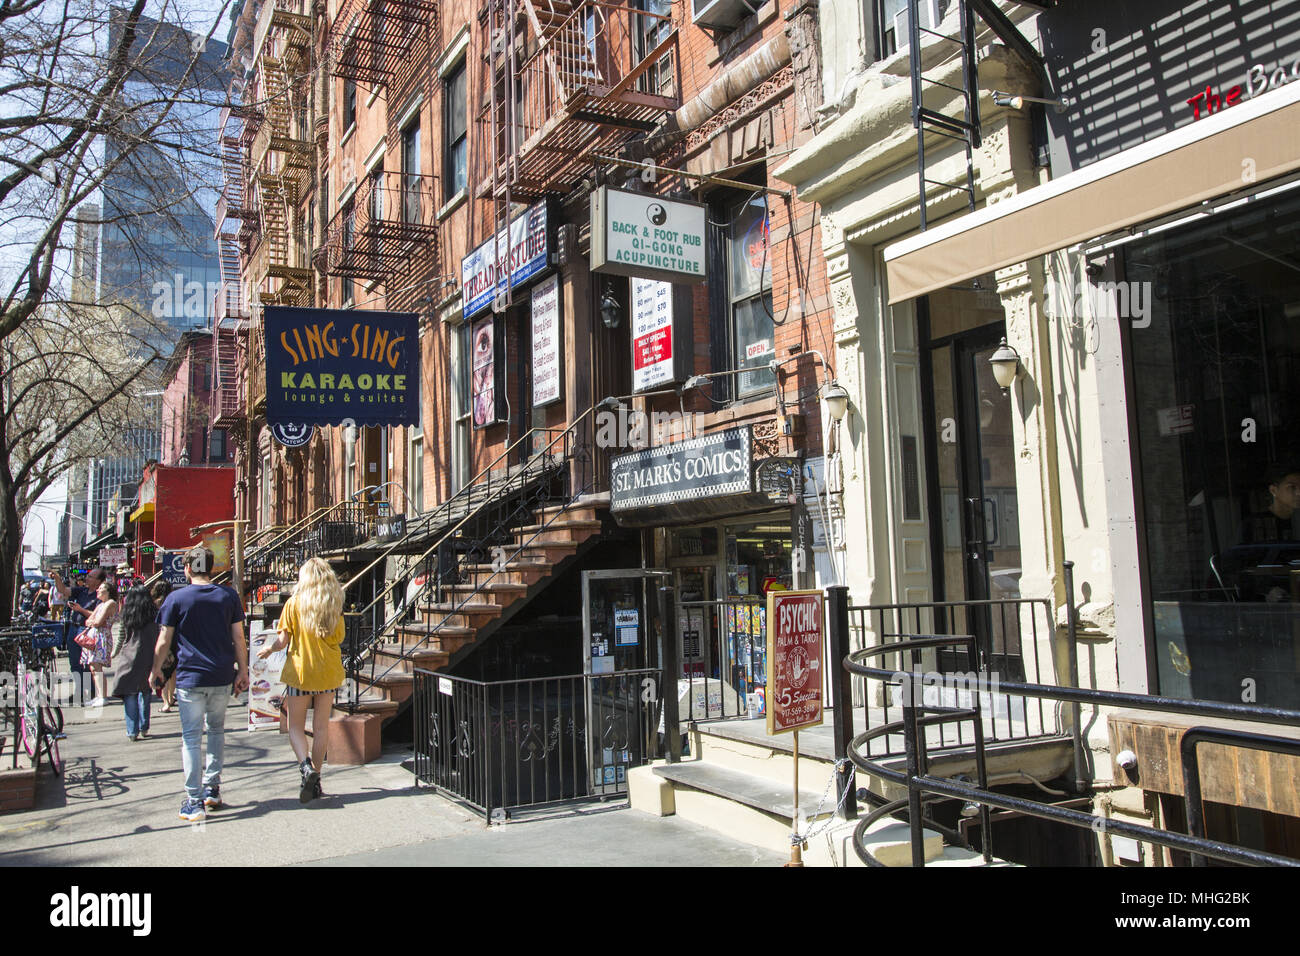 Storefronts along St. Mark's Place in the East Village (Greenich Village) in Manhattan, New York City. Stock Photo